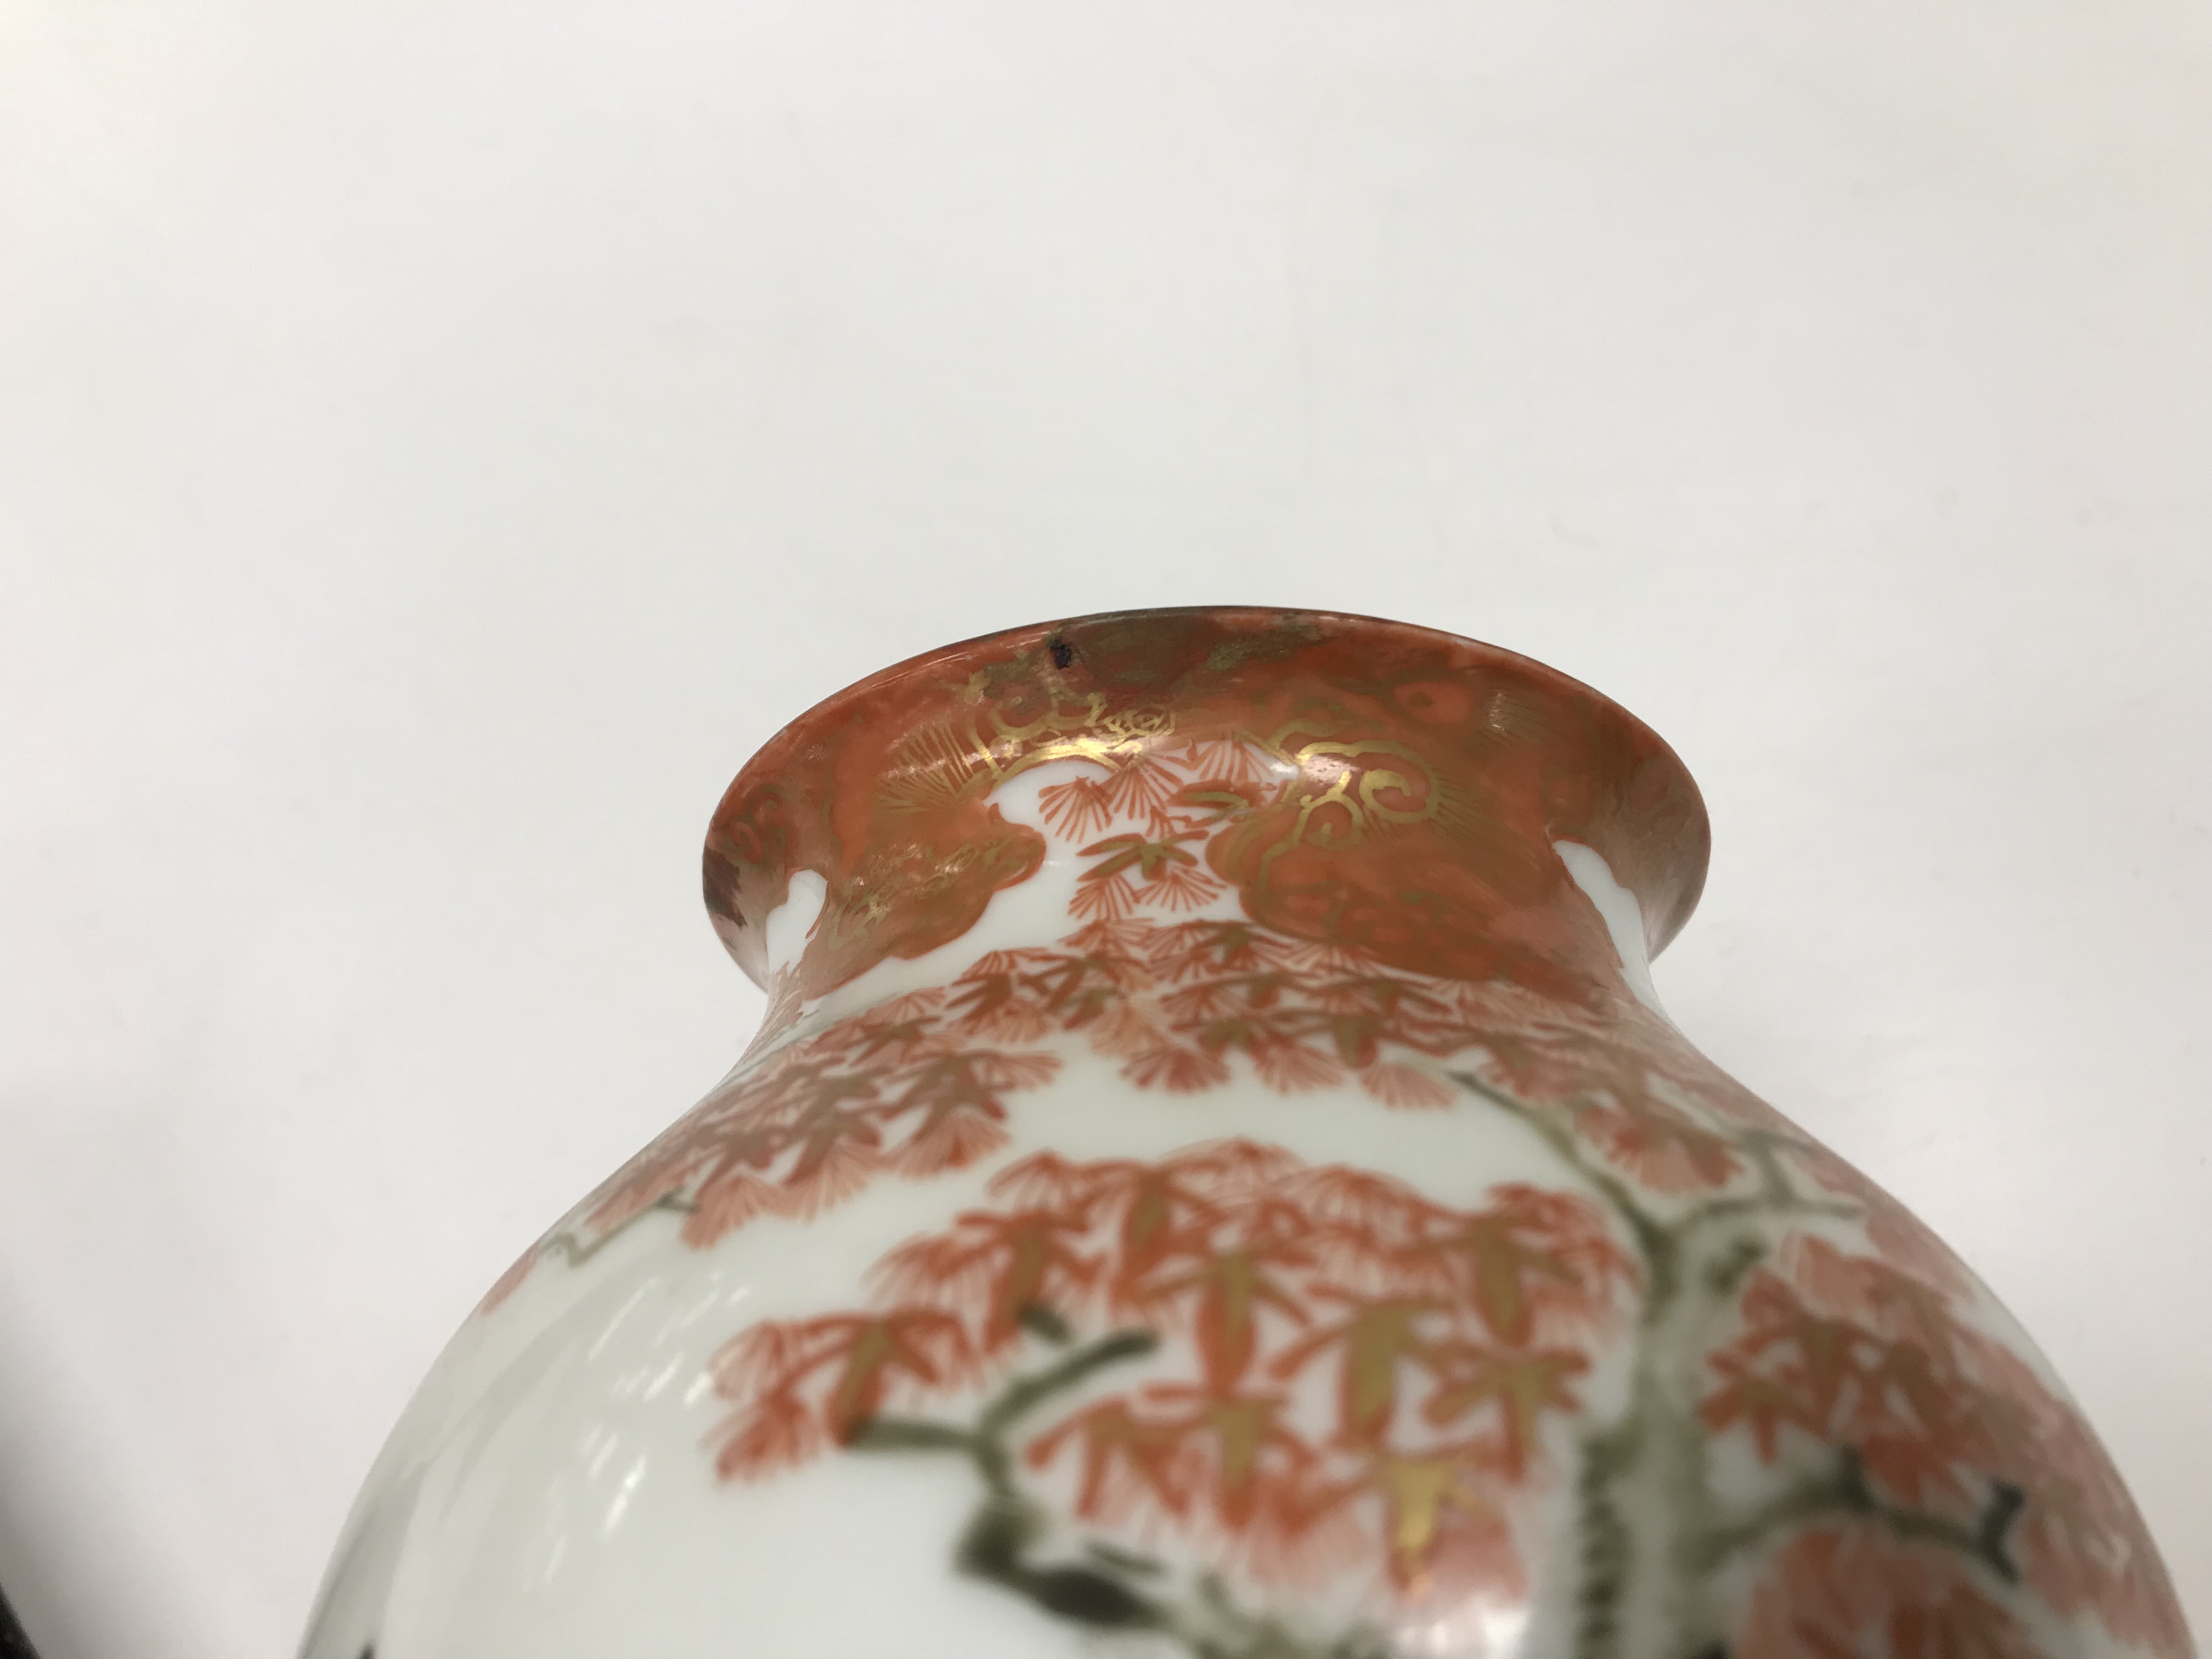 A collection of Japanese Meiji period Kutani ware vases including a moon flask shaped vase with - Image 10 of 152